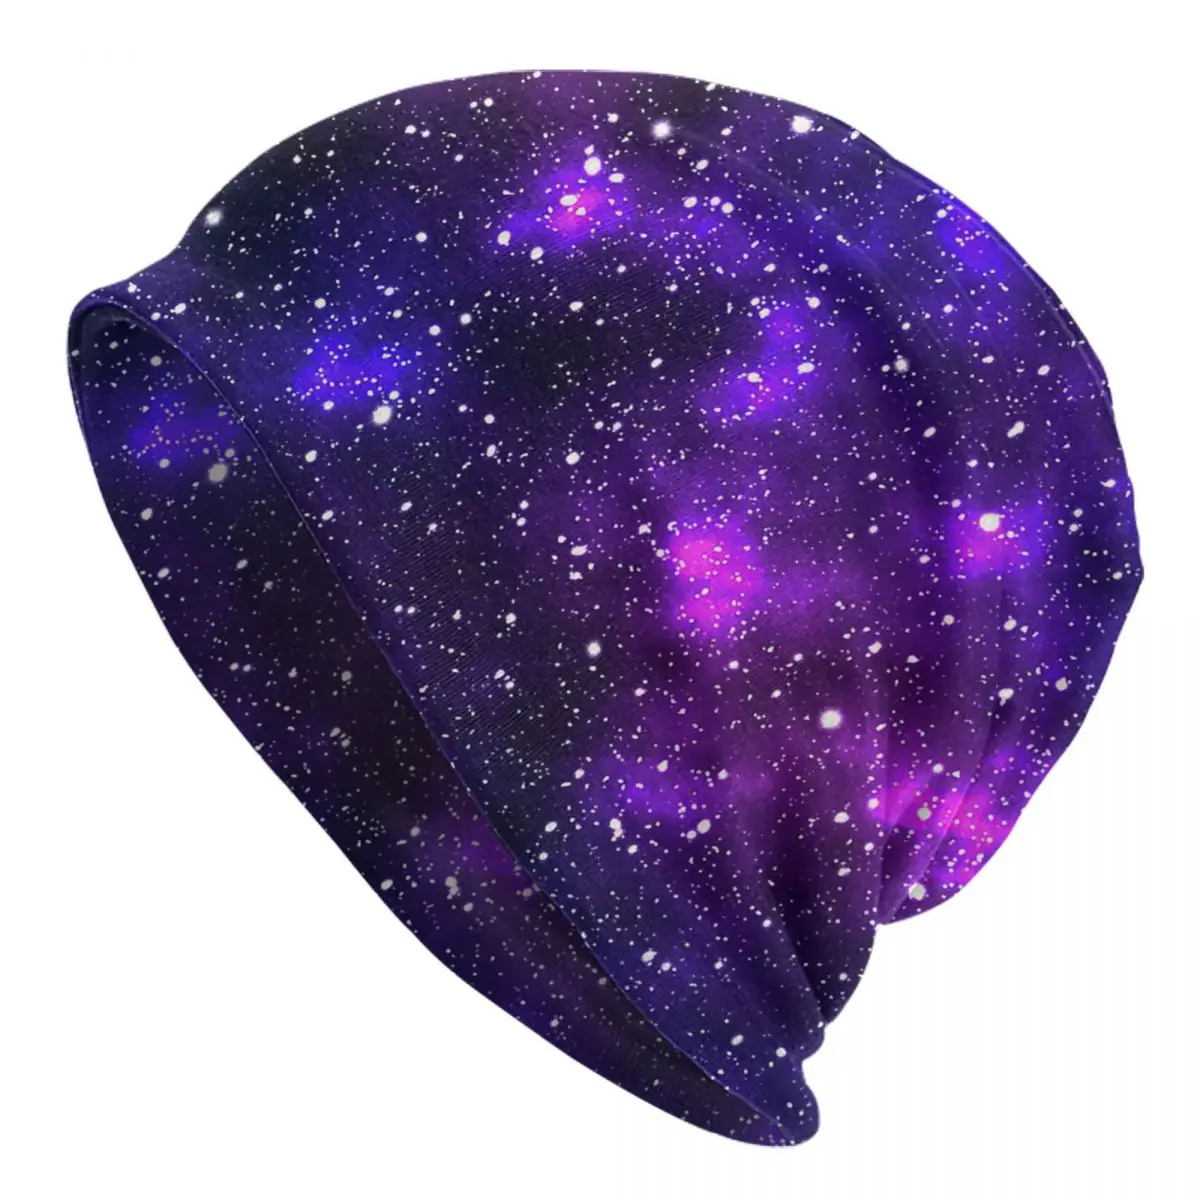 Colorful Galaxy With Nebula,clouds And Starlight Adult Men's Women's Knit Hat Keep warm winter Funny knitted hat